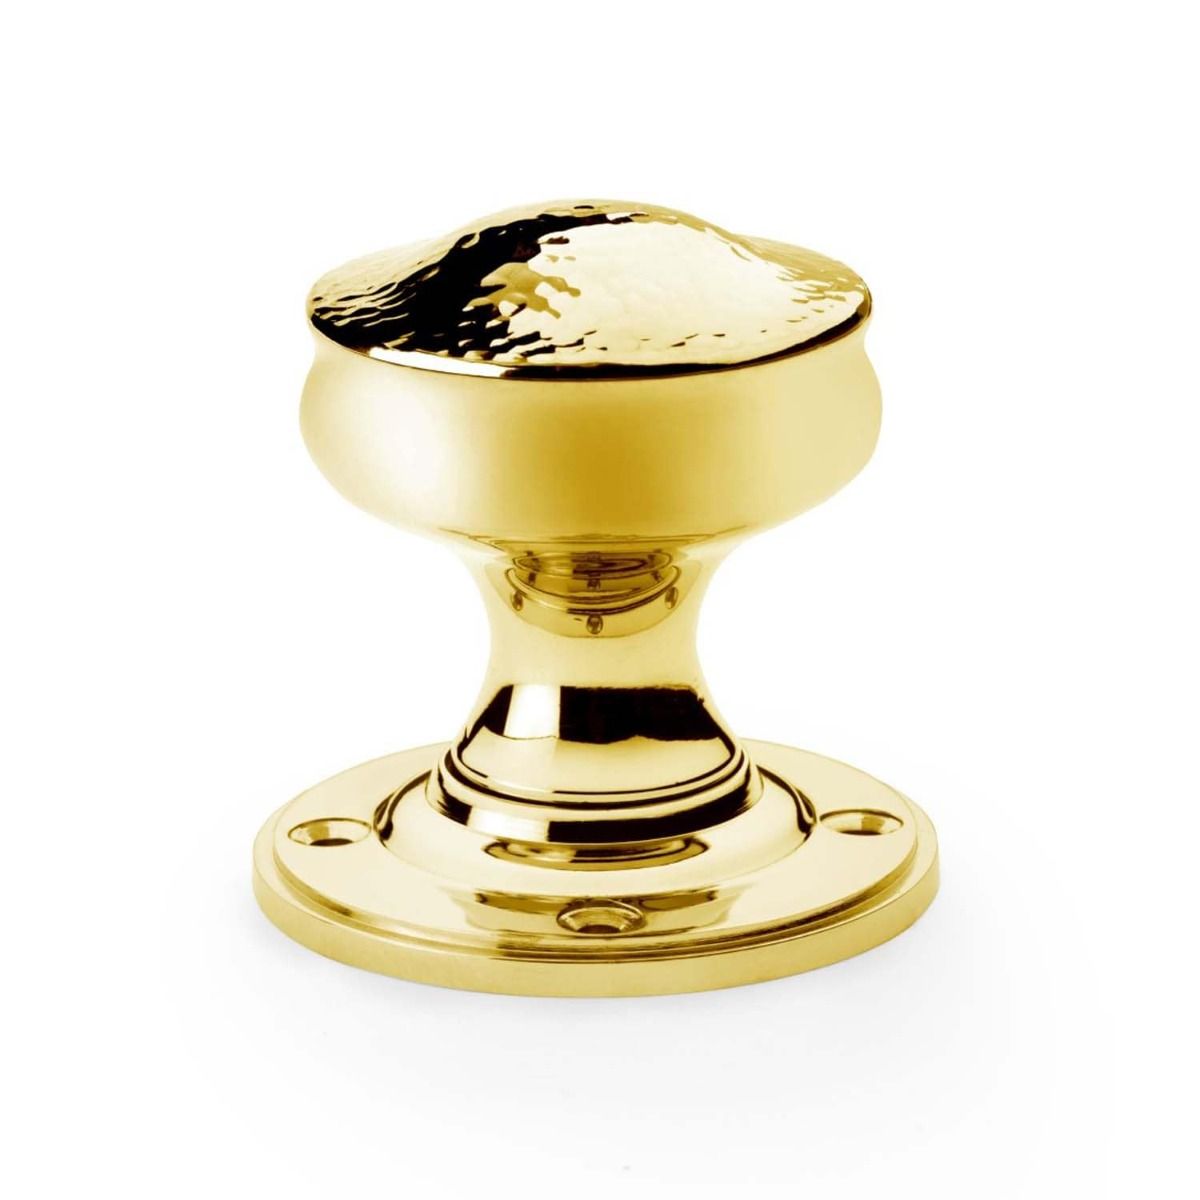 Alexander And Wilks Tortoise Shell Mortice Knob 50mm Dia. Unlacquered Brass AW302-50-UB